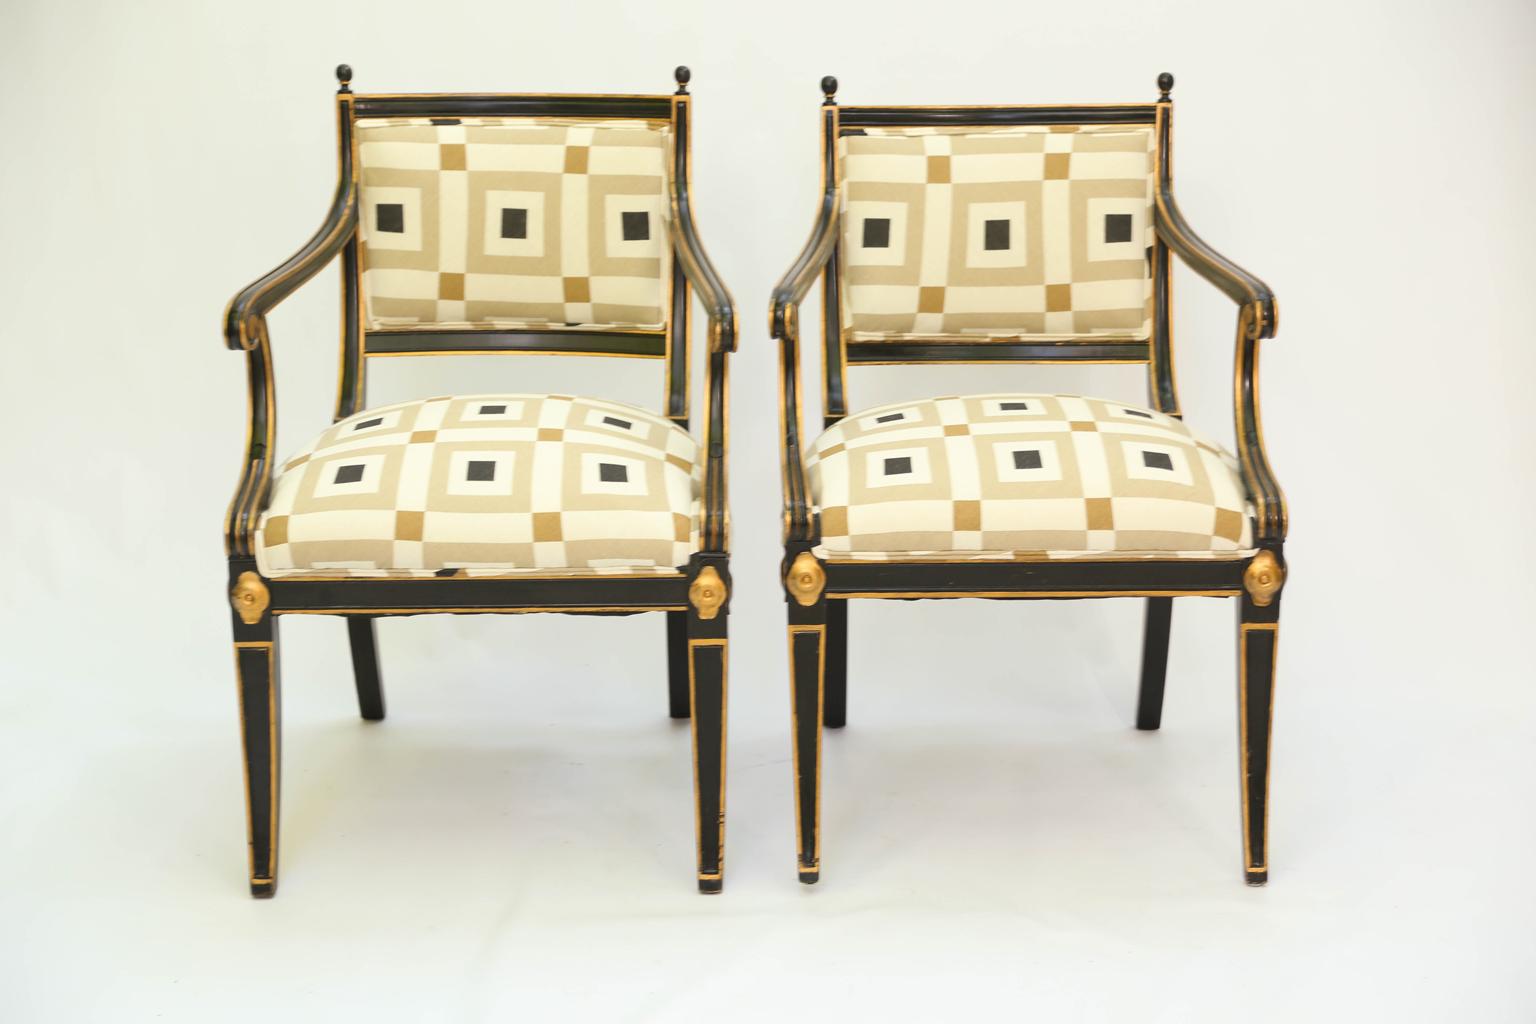 Pair of armchairs, in Regency taste, each having a black painted finish with parcel-gilt accents, their rectangular, padded backrests in molded frame, surmounted by finials, curved arms raised on downswept, reeded terminals, flanking the stuff-over